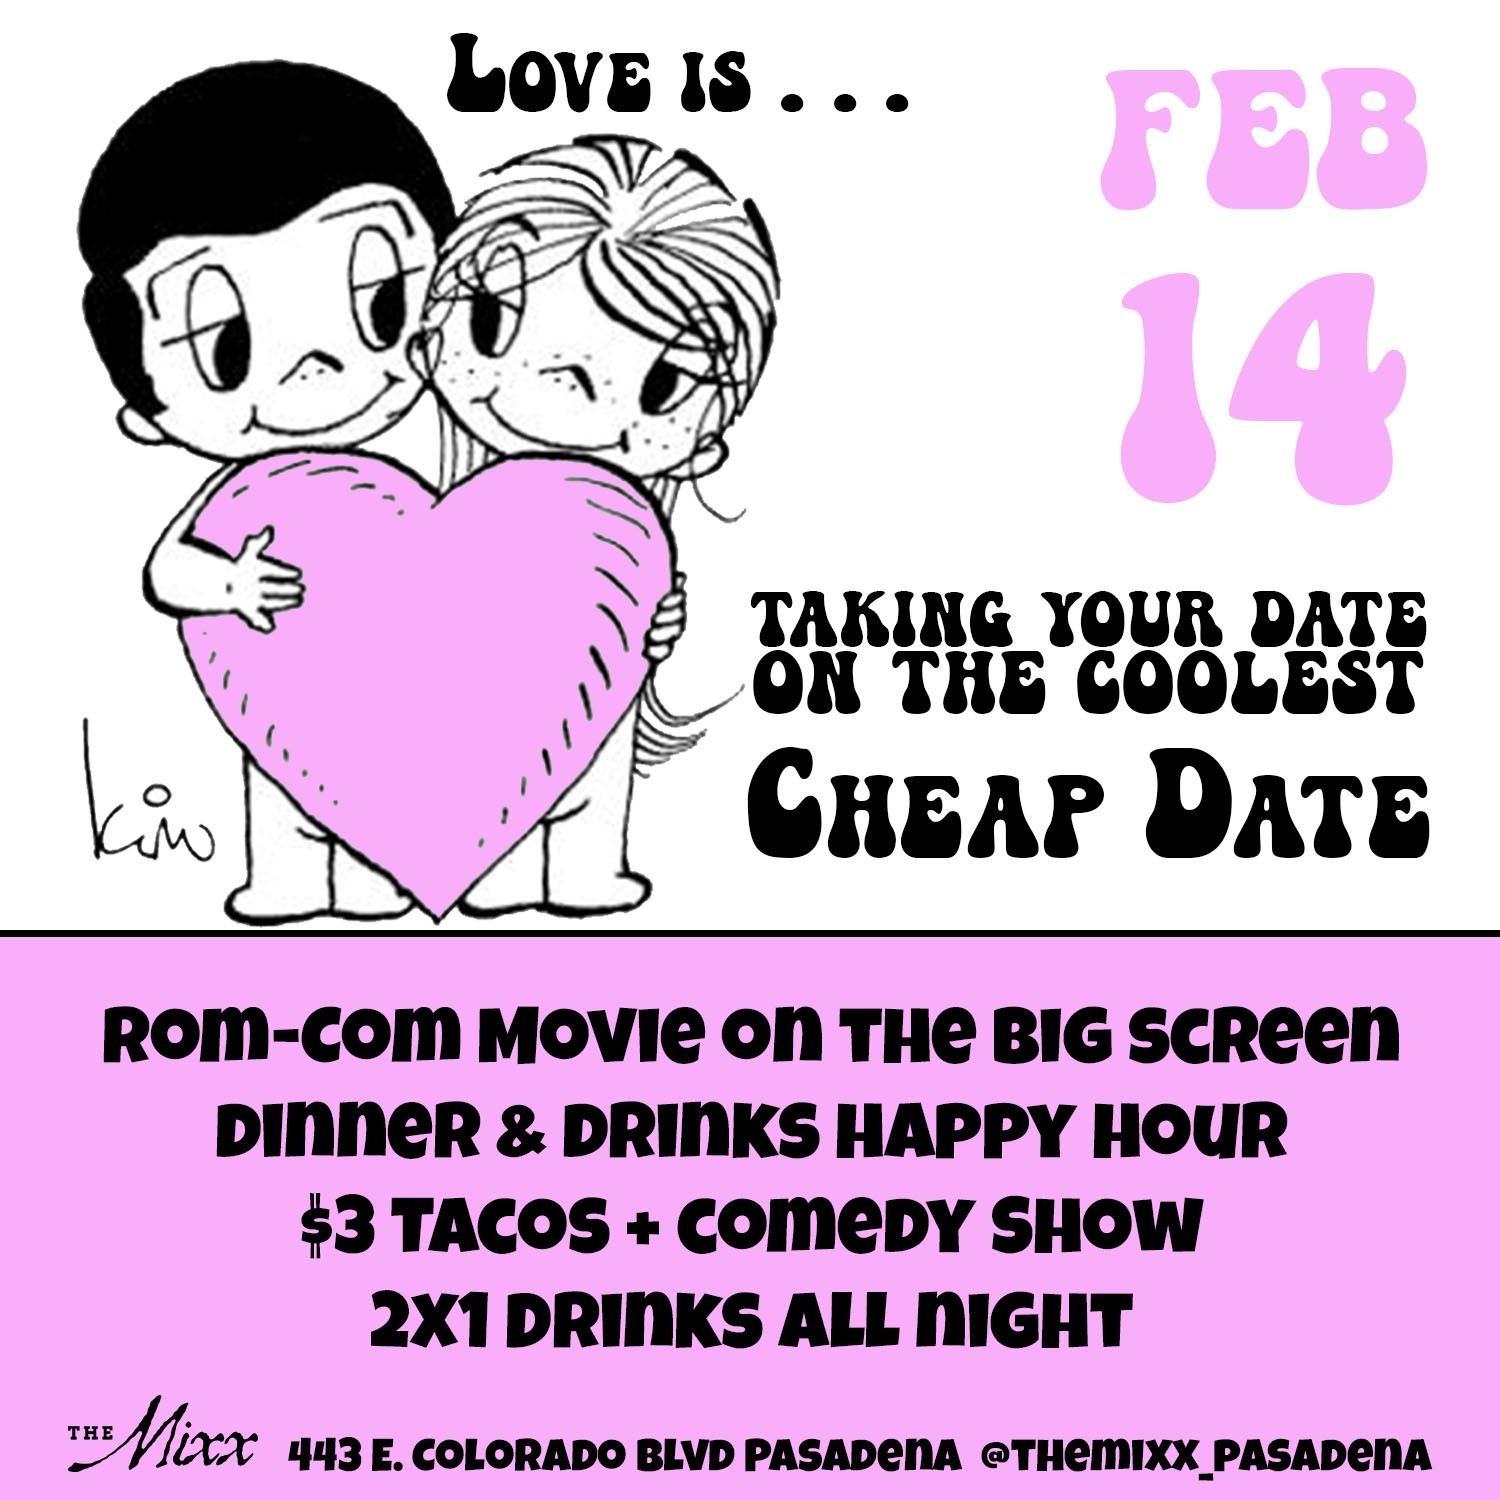 You are currently viewing CHEAP DATE – A Valentines Day Adventure on a budget